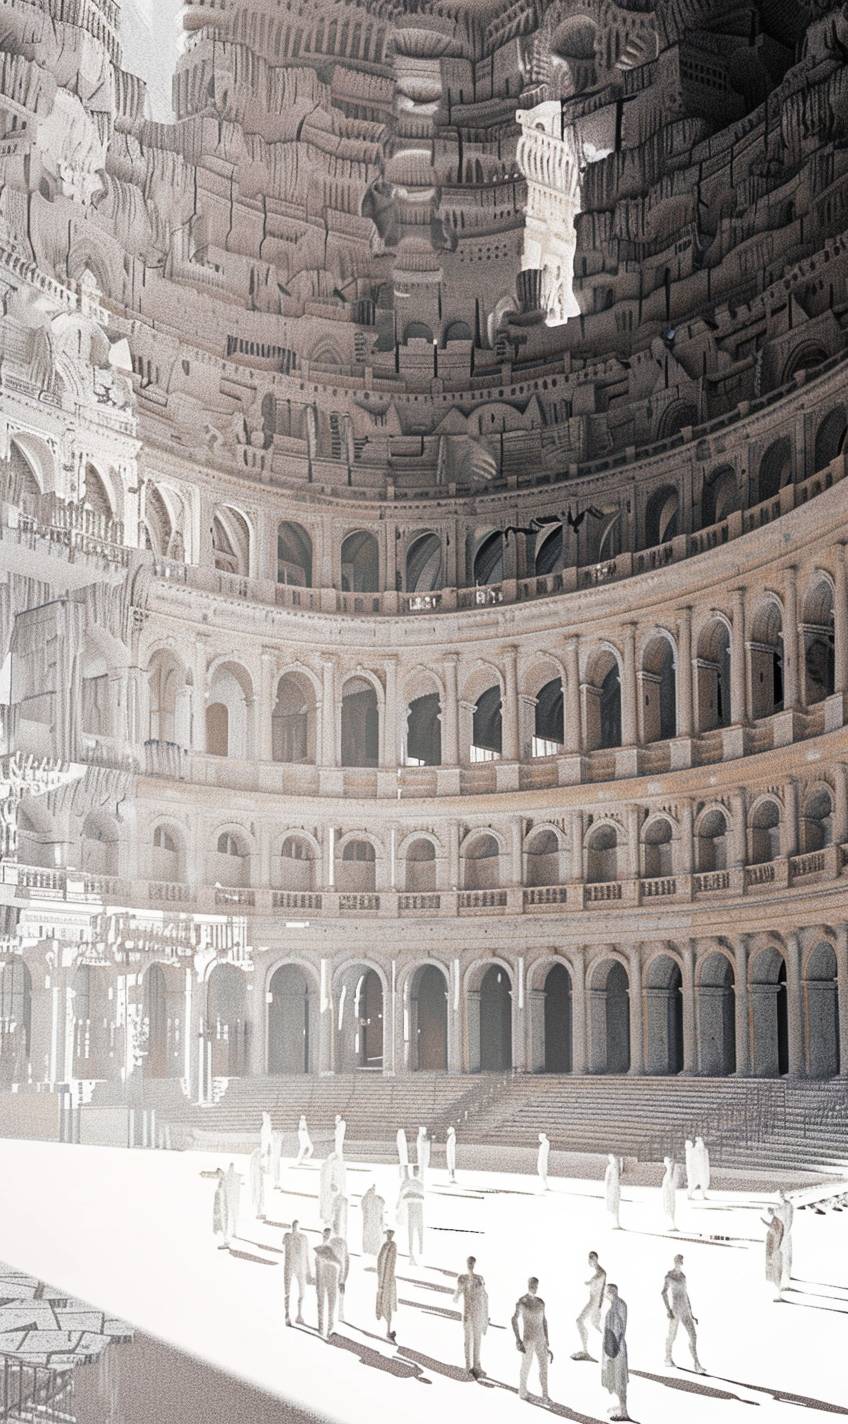 In the style of Nick Veasey, ancient coliseum hosting spectral gladiators